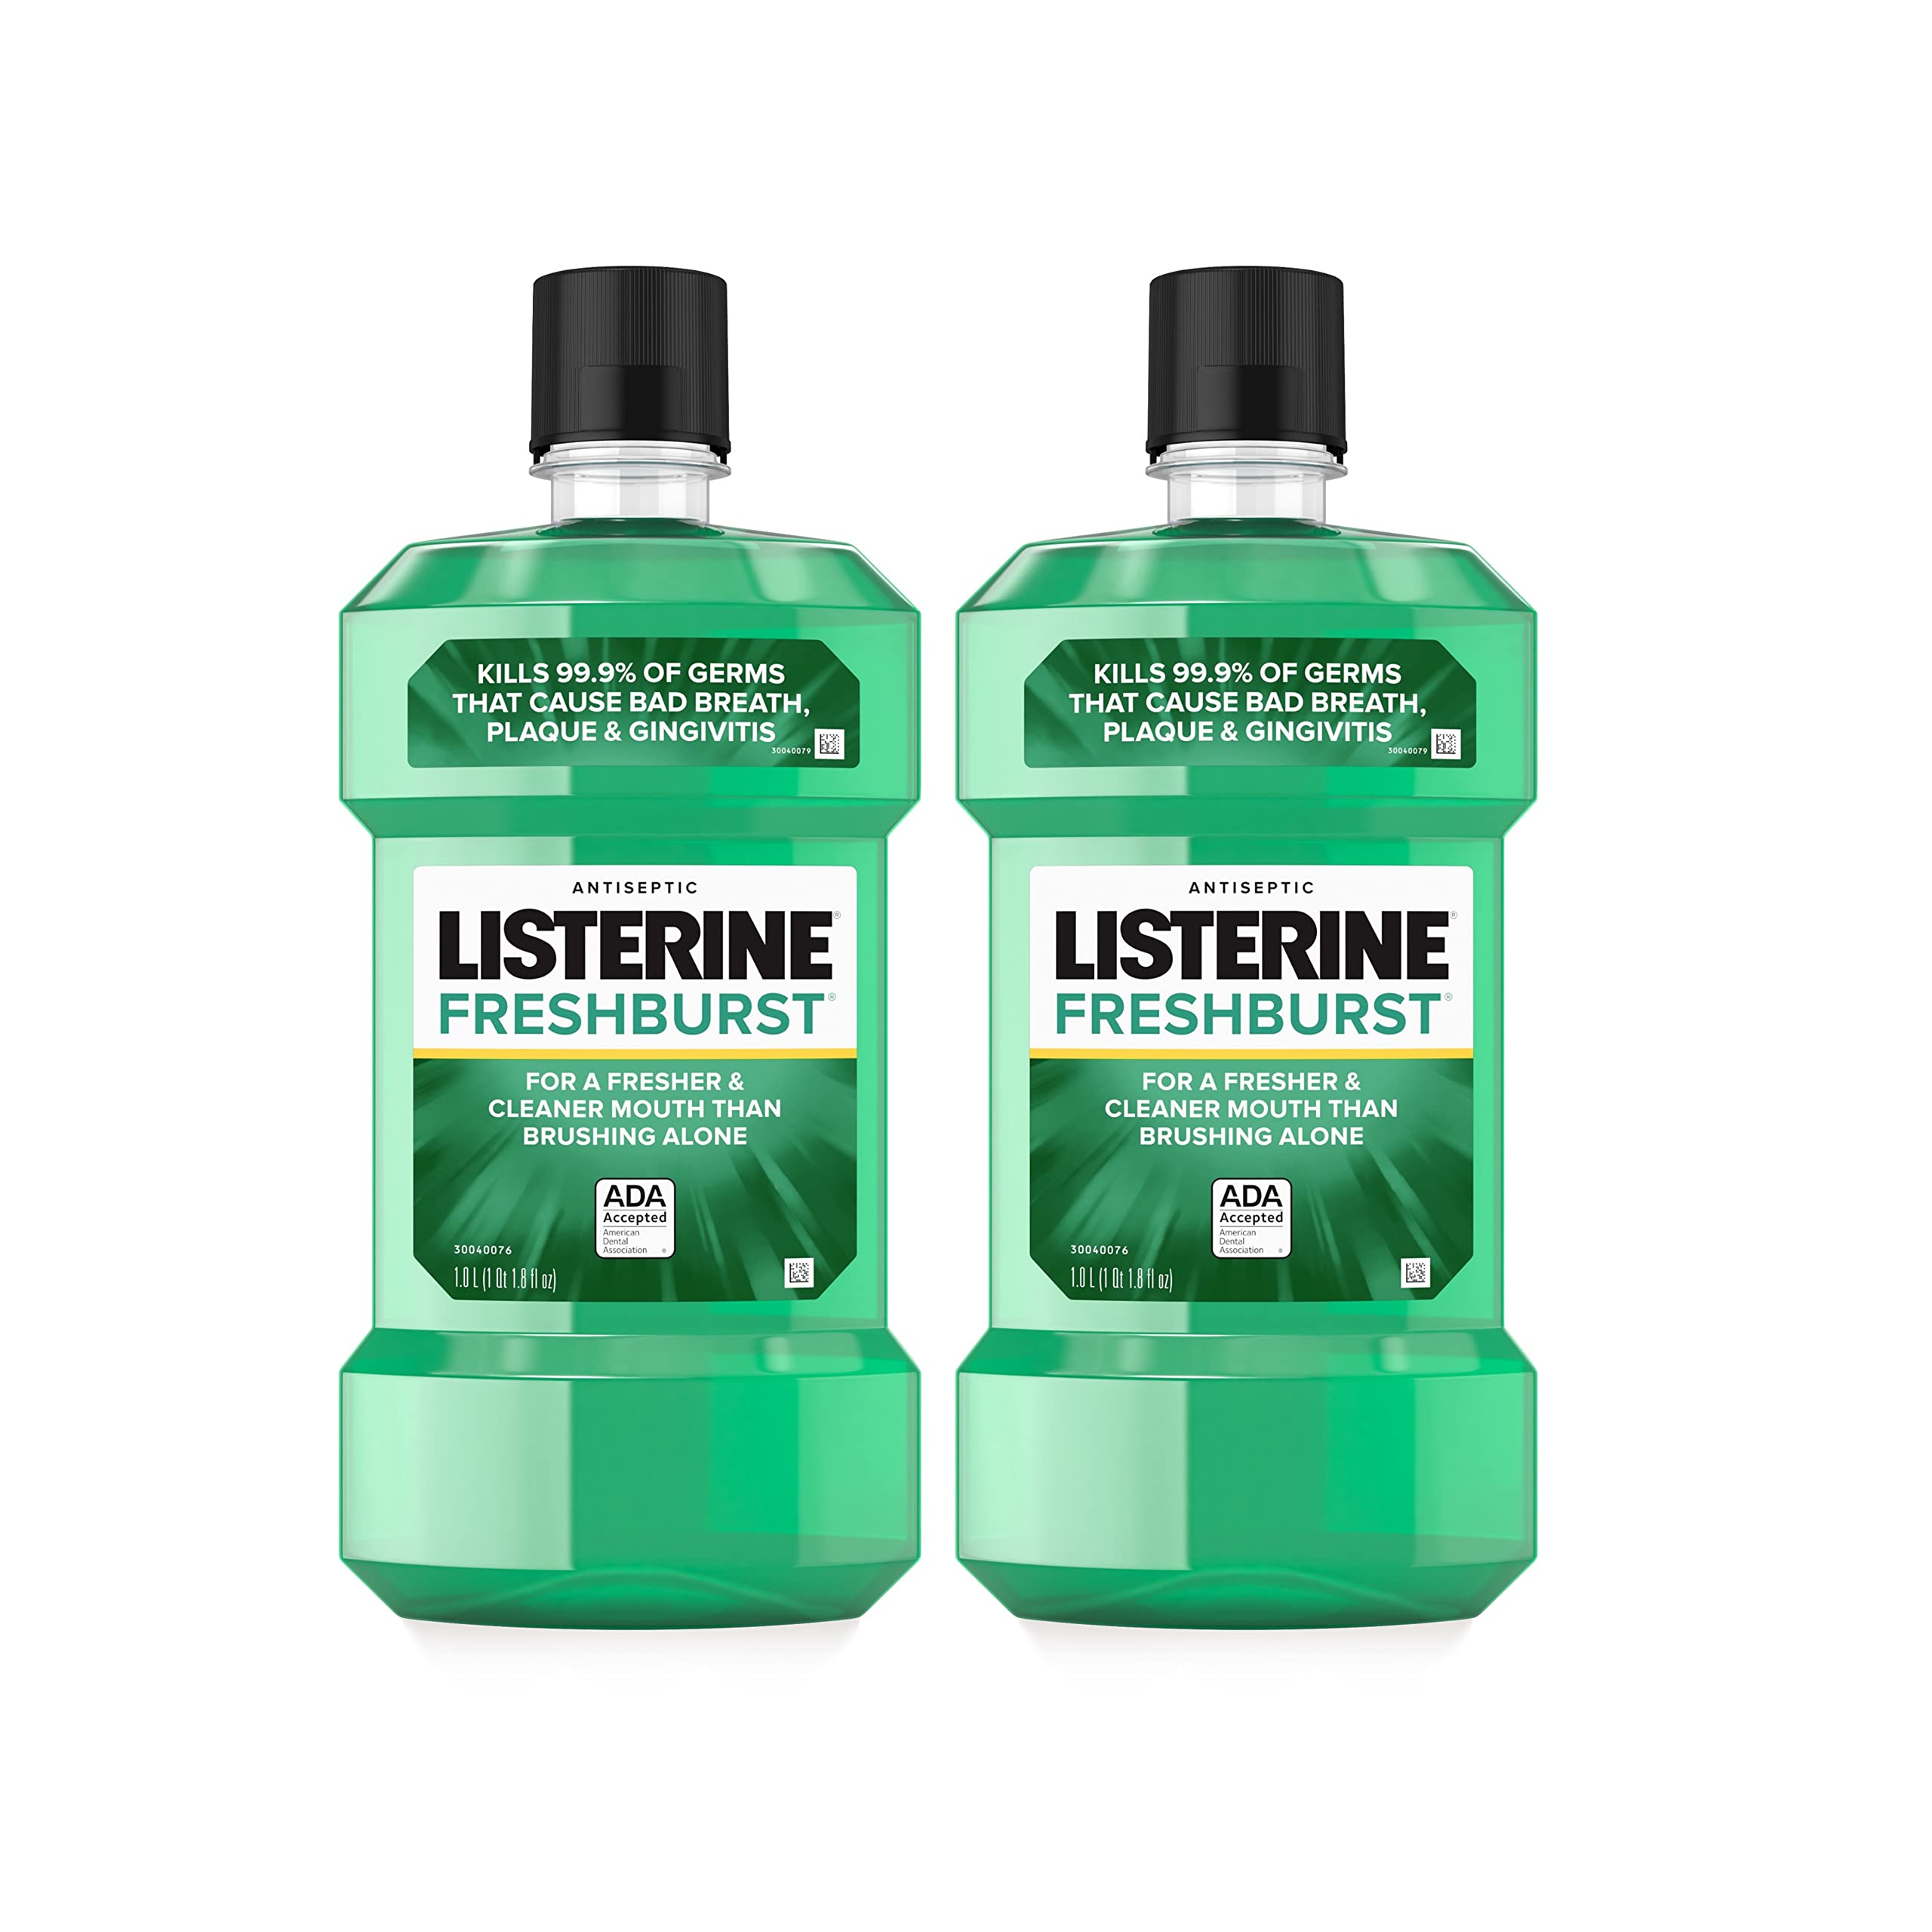 2-Pack 1-Liter Listerine Freshburst Antiseptic Mouthwash (Spearmint) $9.85 ($4.93 Each) + Free Shipping w/ Prime or on $25+